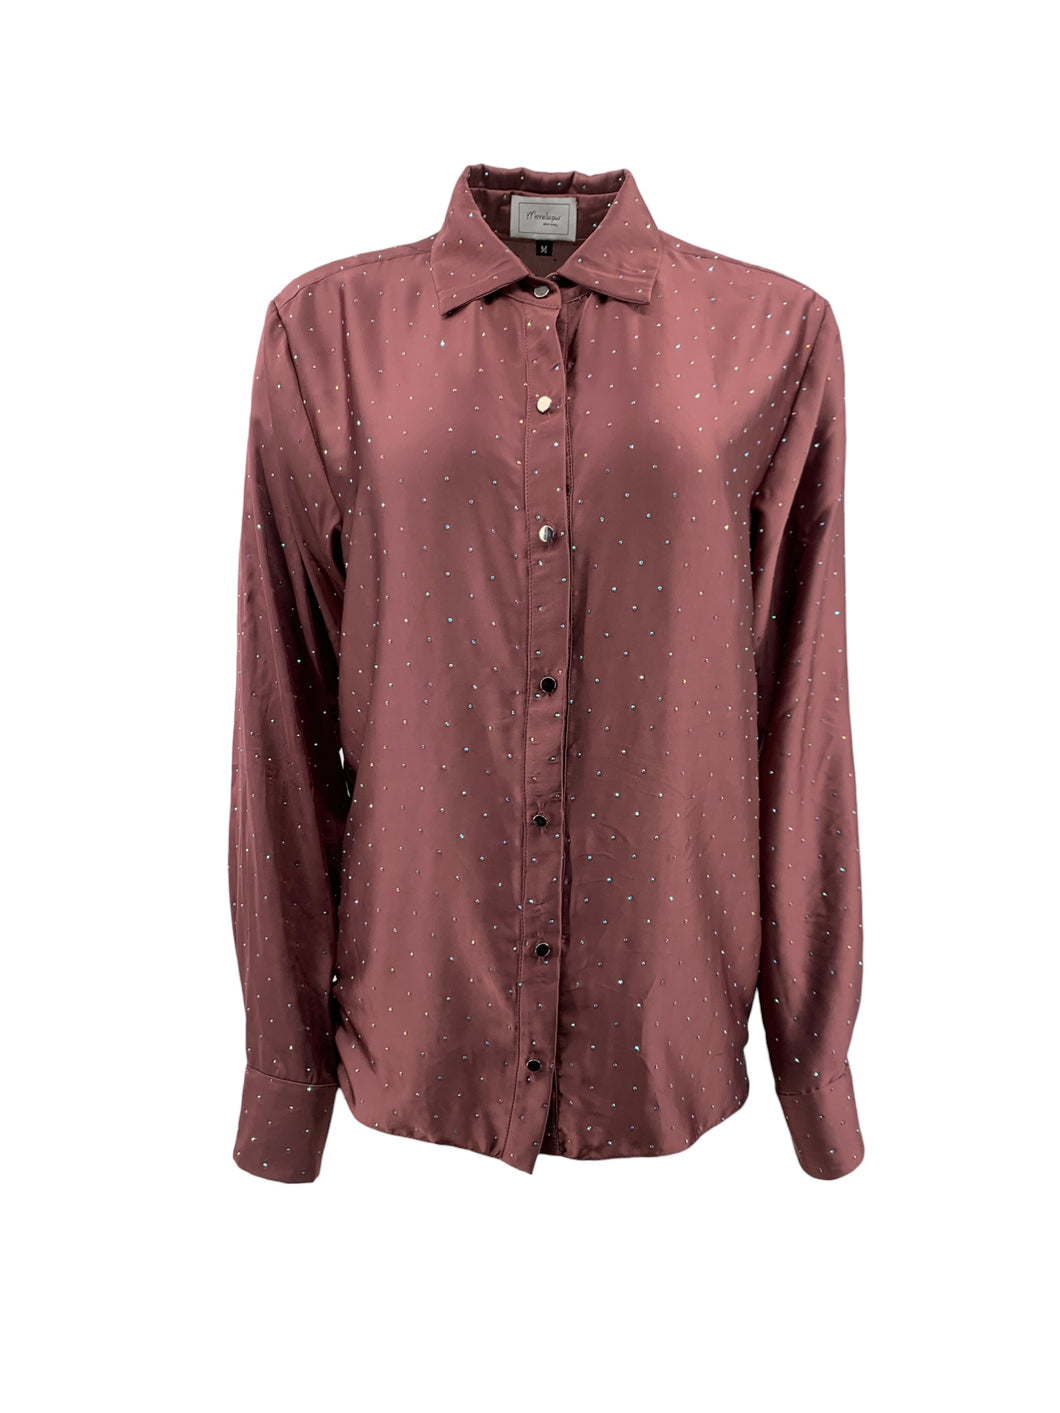 Rosè Satin Shirt with Crystals - Limited Edition